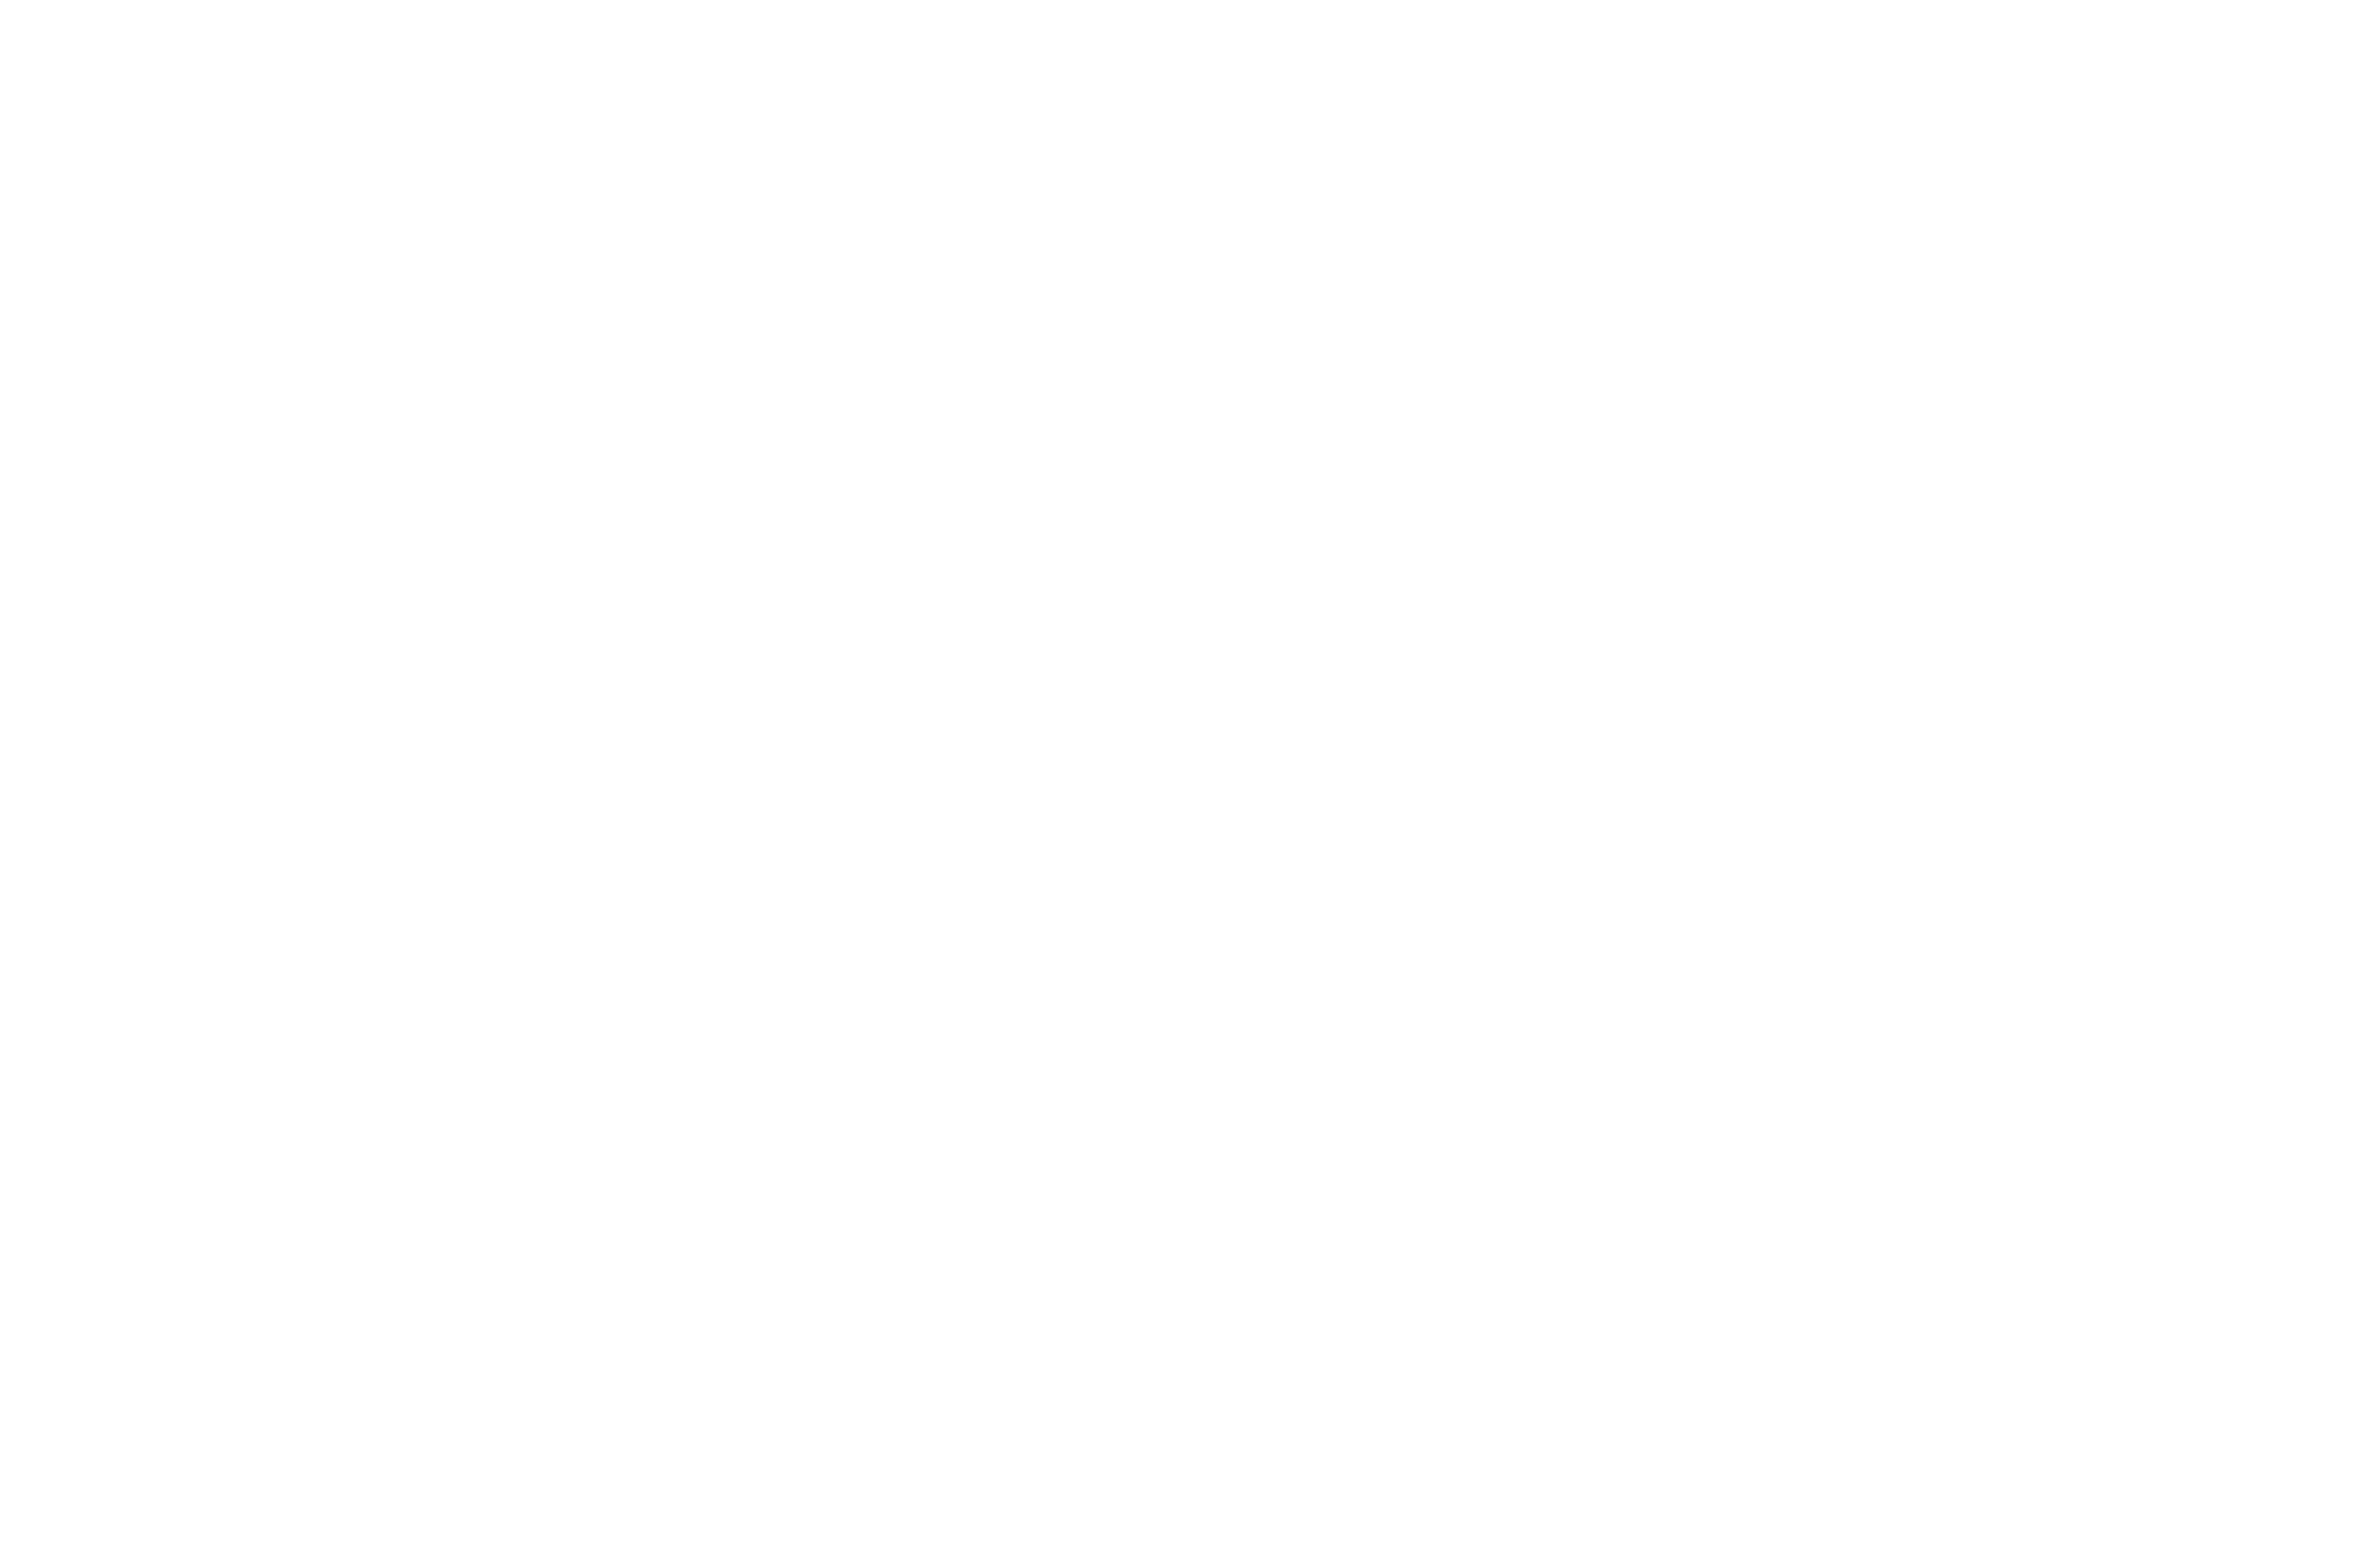 Group Care Housing,Residential Care Homes,Health Services in Housing,Hospice Care,Medical Equipment Access,Case Management,Behavioral Therapy,Medication Management,All-Inclusive Living,Joy Homes Shelters